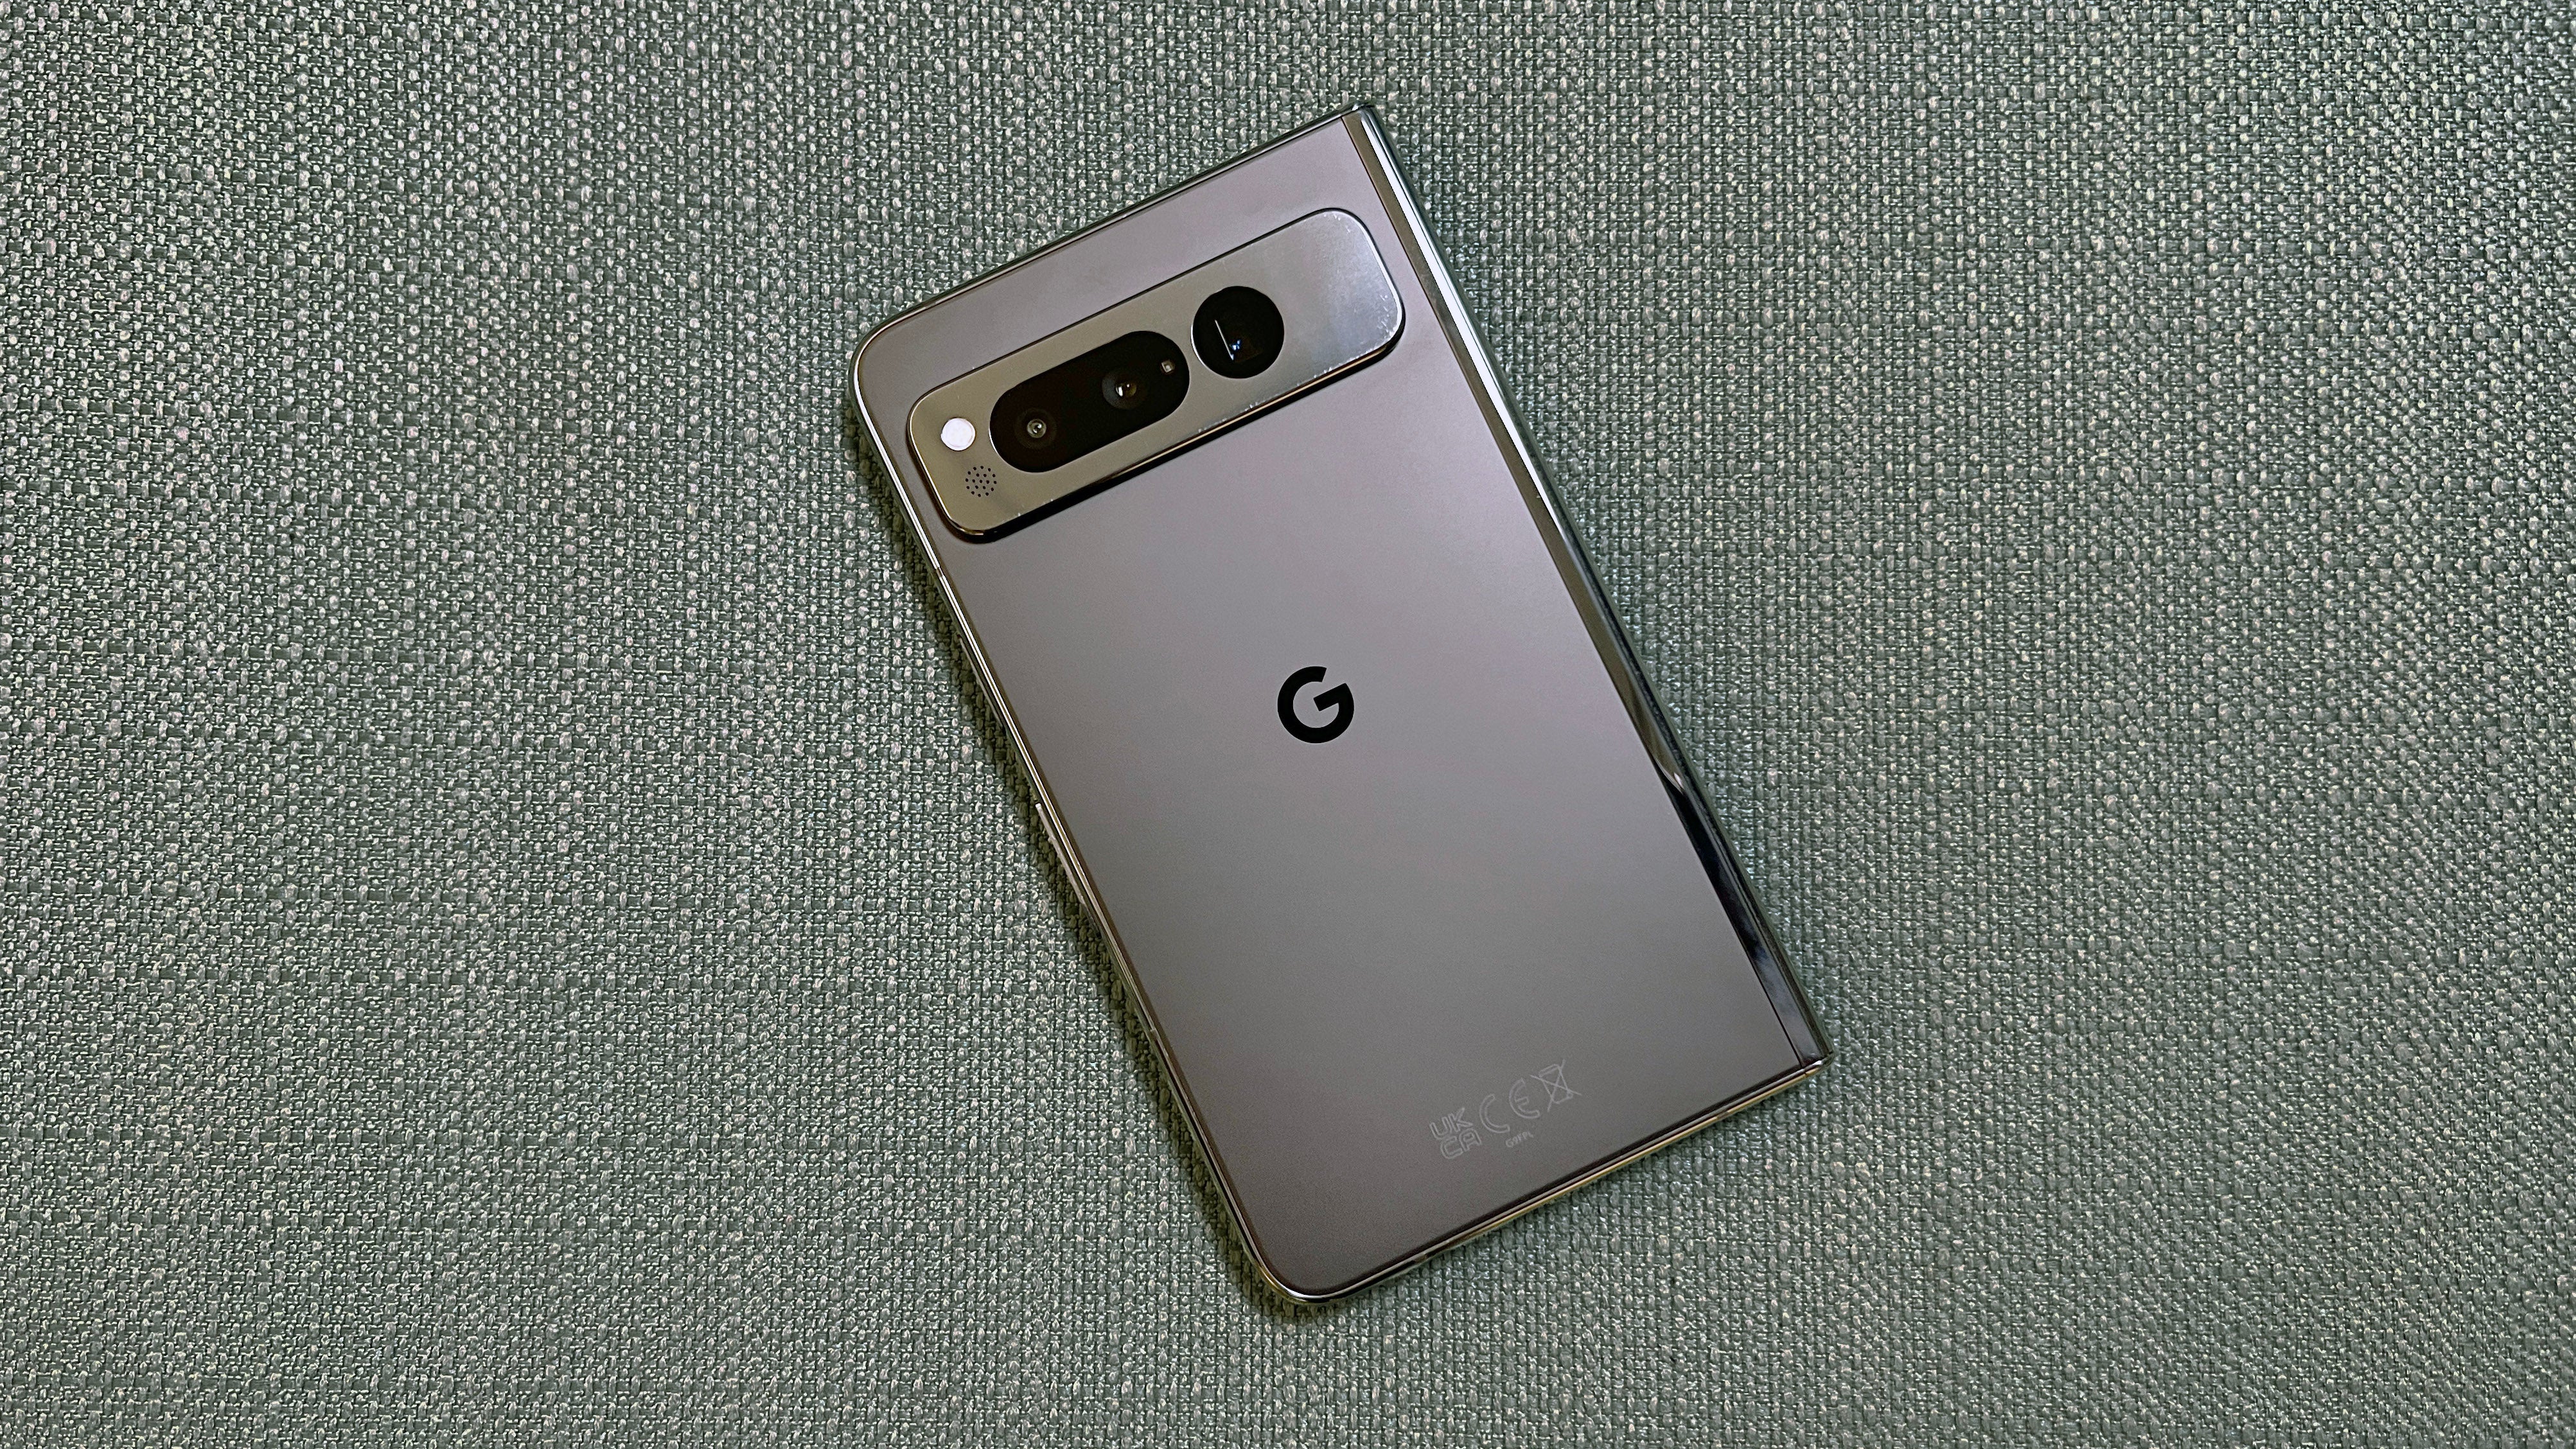 The Pixel Fold includes a 48 MP Quad PD lense alongside a 10.8 MP ultrawide and a 10.8 MP telephoto lenses. In addition, there's a 9.5 MP Dual PD front camera and 8 MP inner camera for video calls. (Photo: Dan Ackerman / Gizmodo)